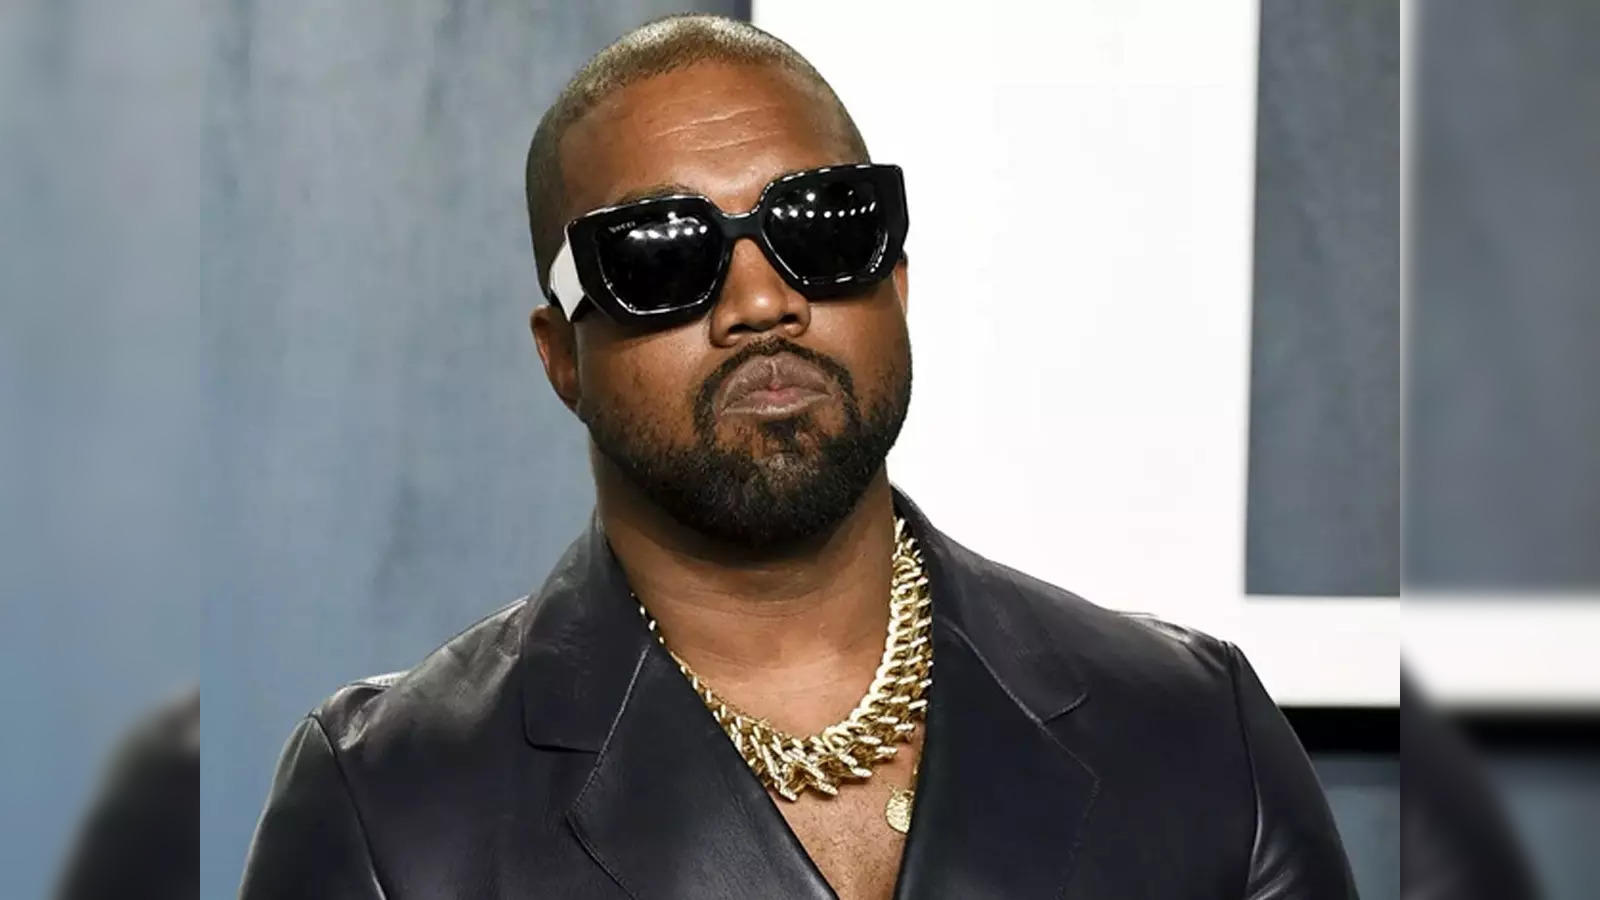 Kanye West sports a hockey jersey and gold chains as he leaves his